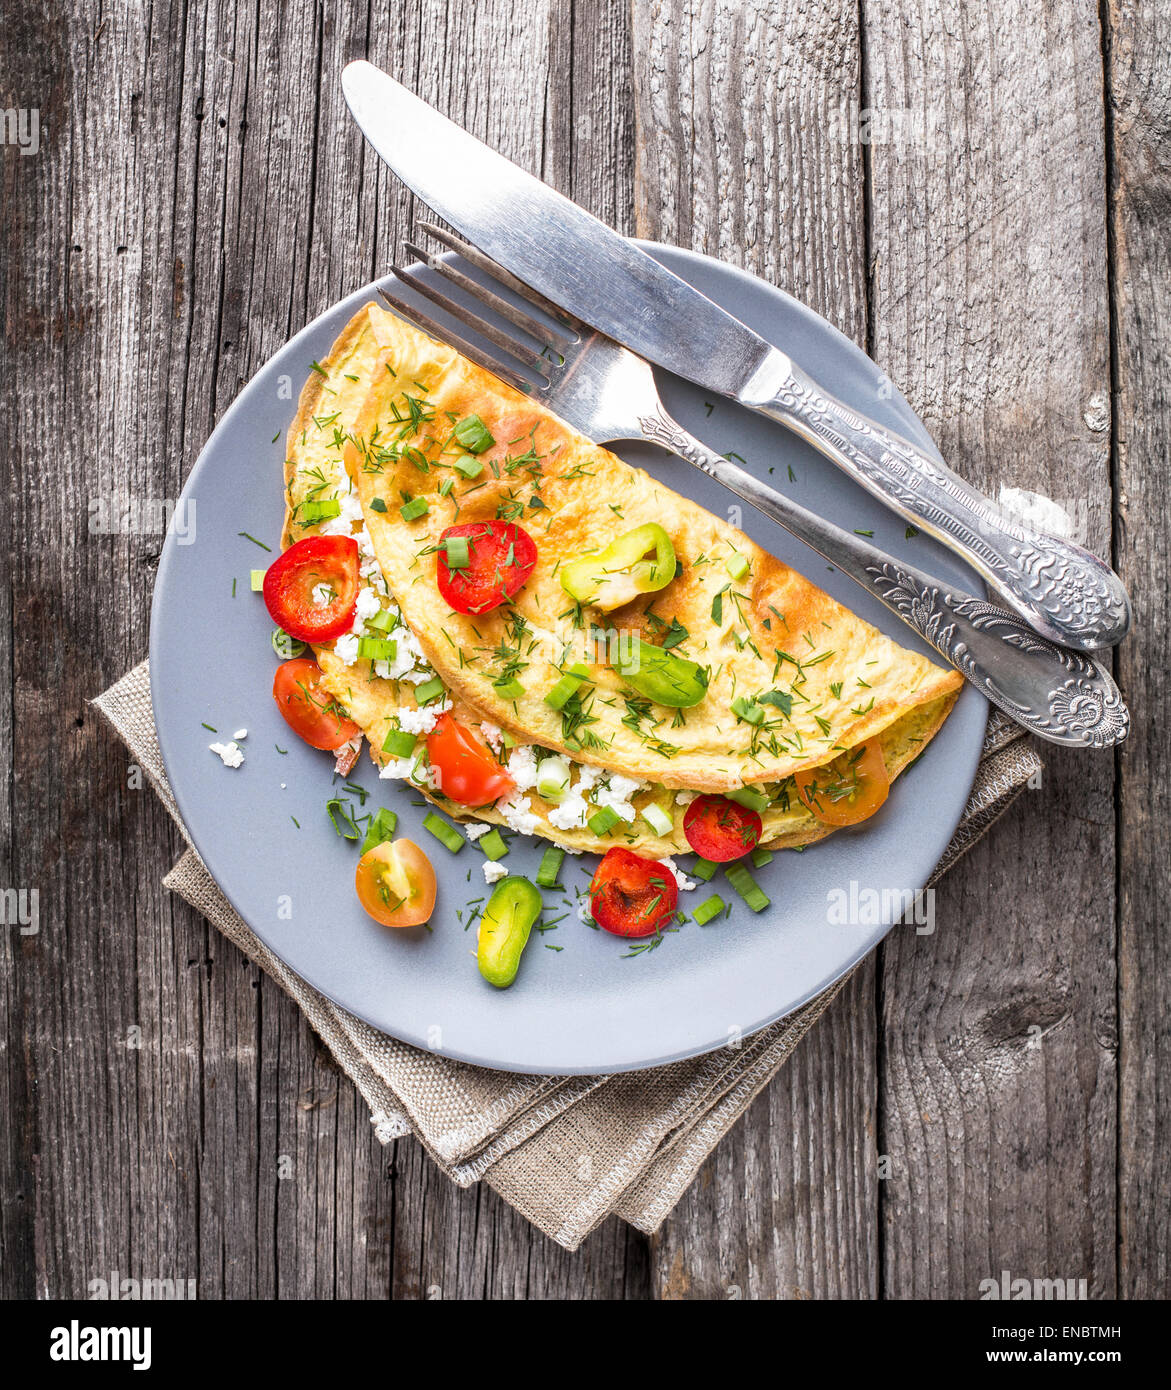 Omelette with vegetables and herbs on a plate Stock Photo